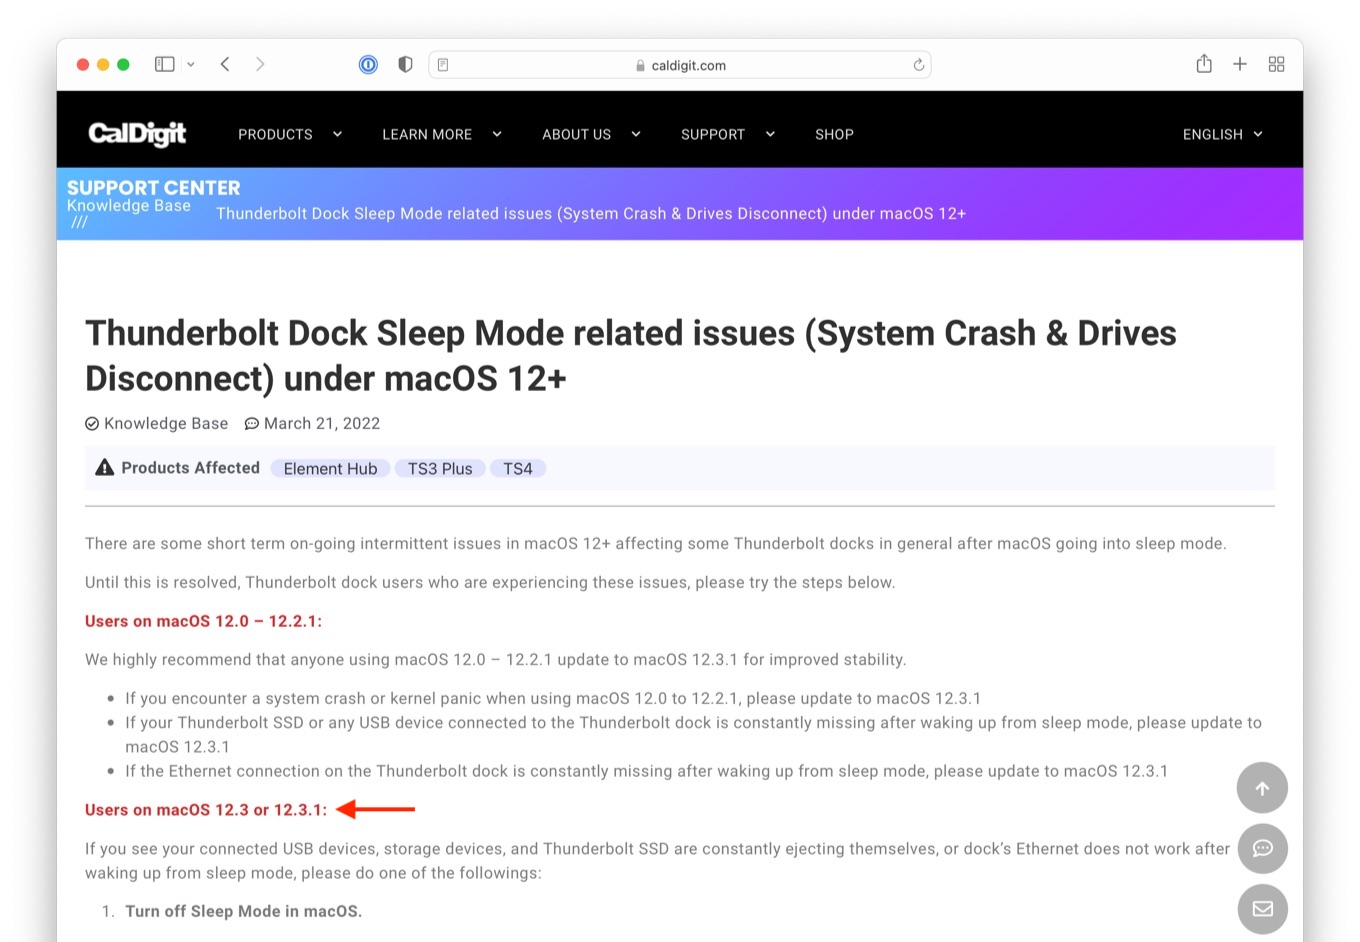 Thunderbolt Dock Sleep Mode related issues (System Crash & Drives Disconnect) under macOS 12+